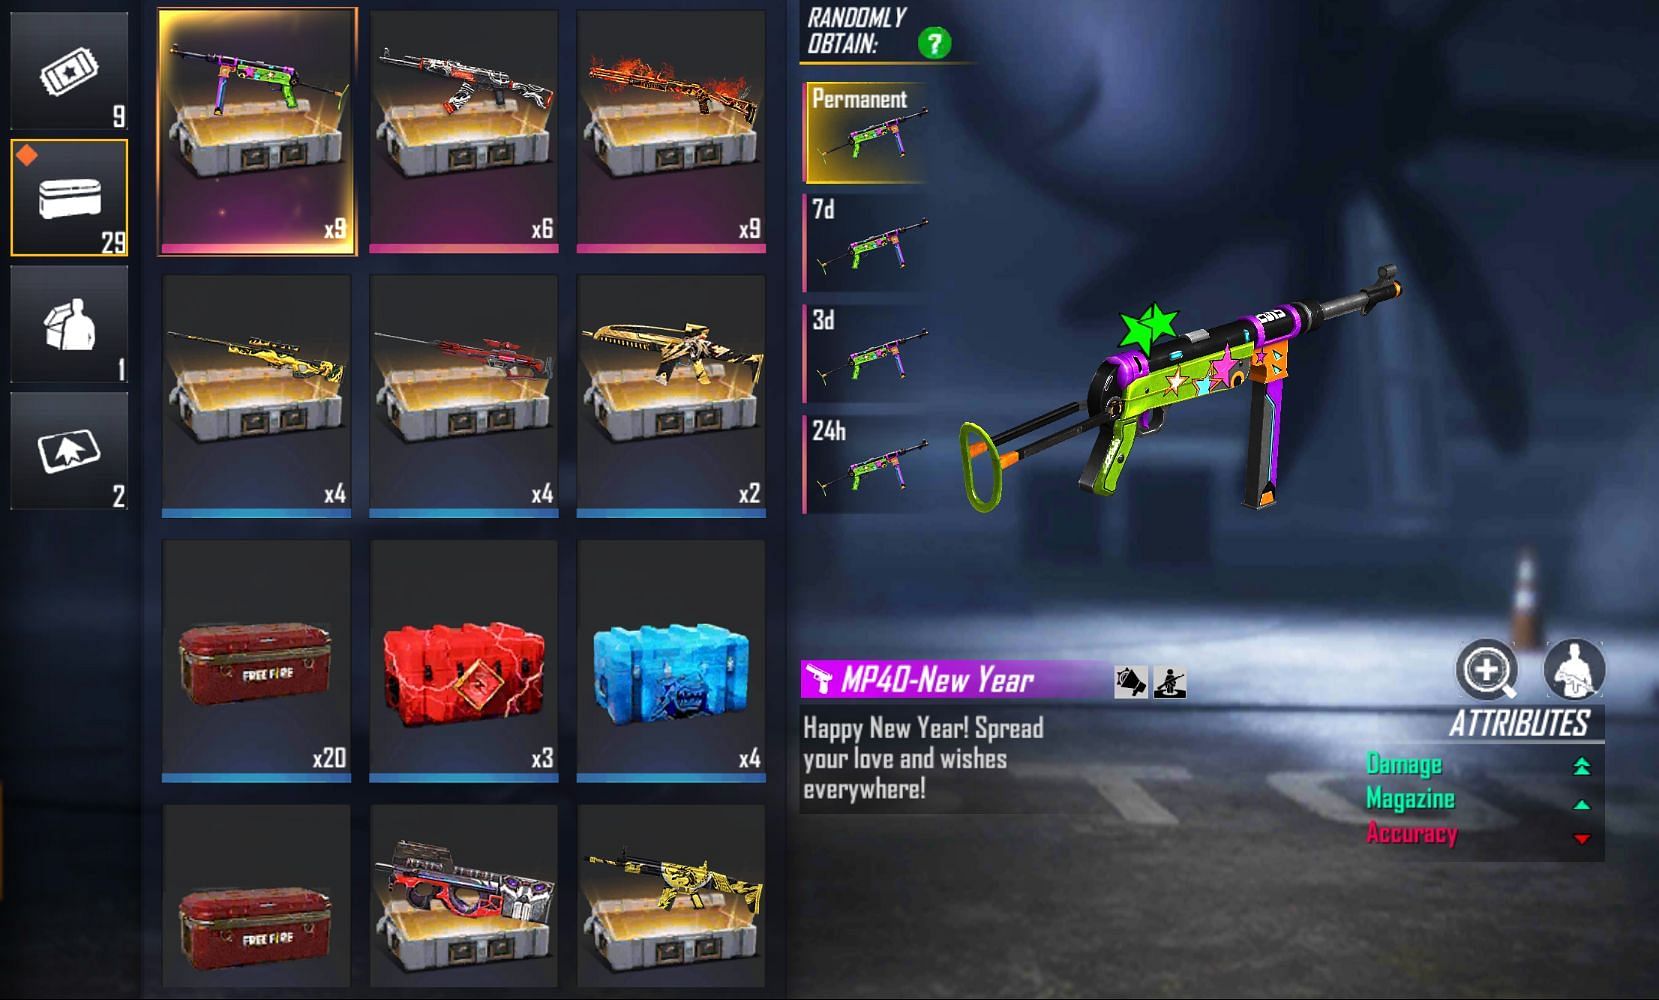 MP-40 New Year Weapon Loot Crate (Image via Garena)